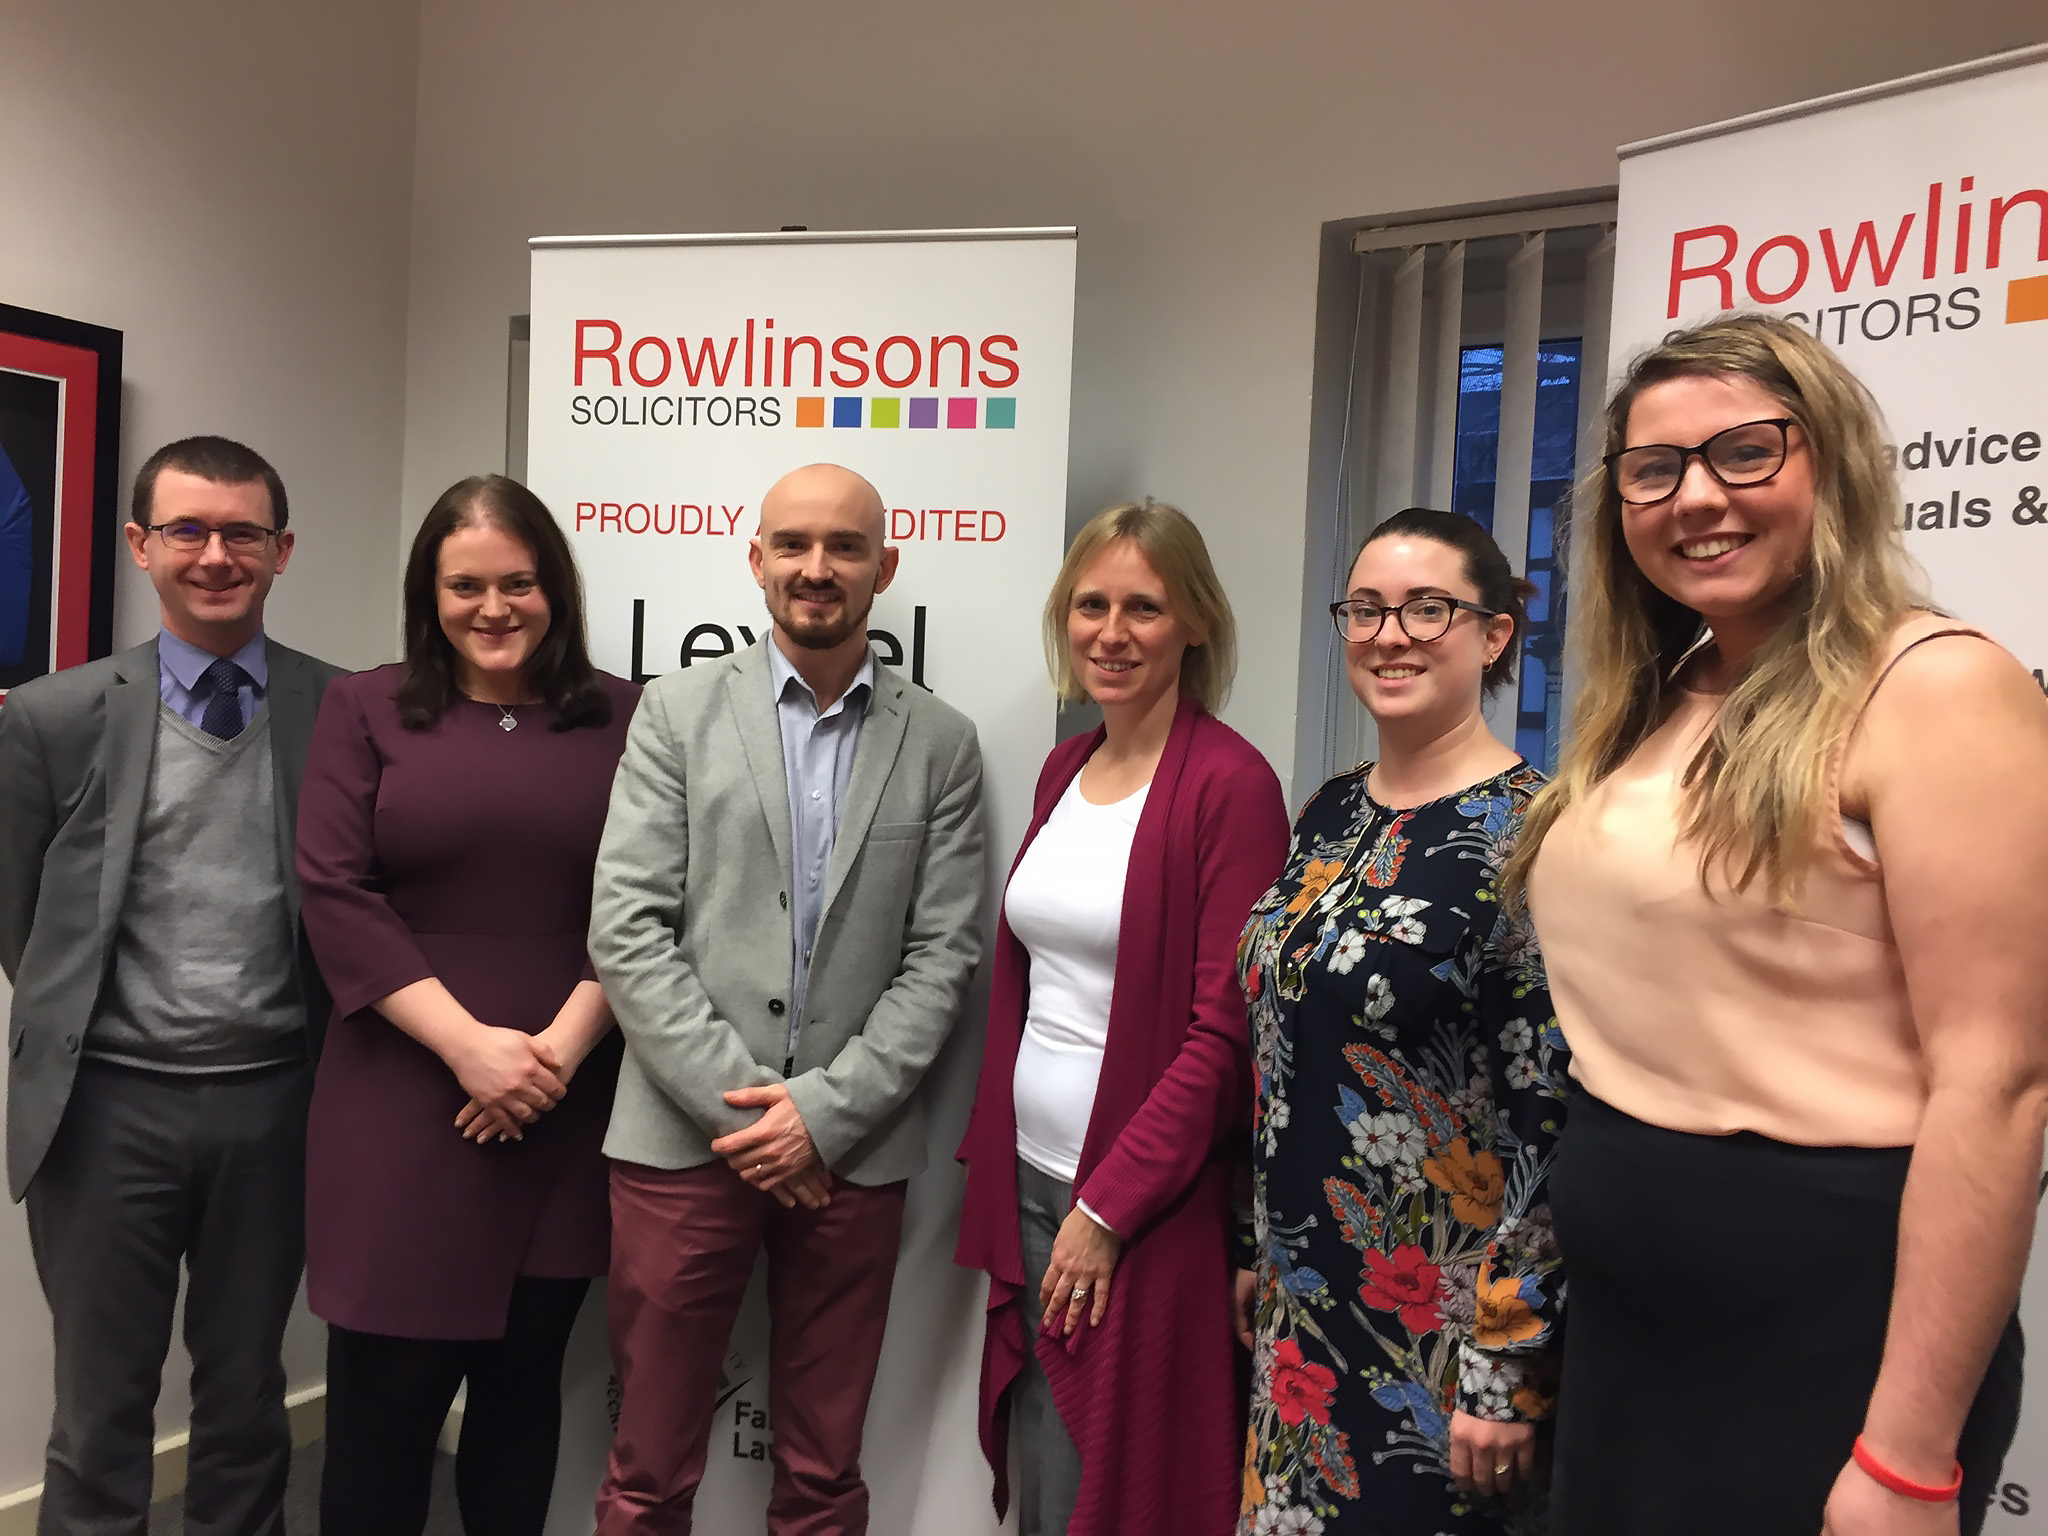 Rowlinsons Solicitors announce Chapter as their charity of the Year for 2020